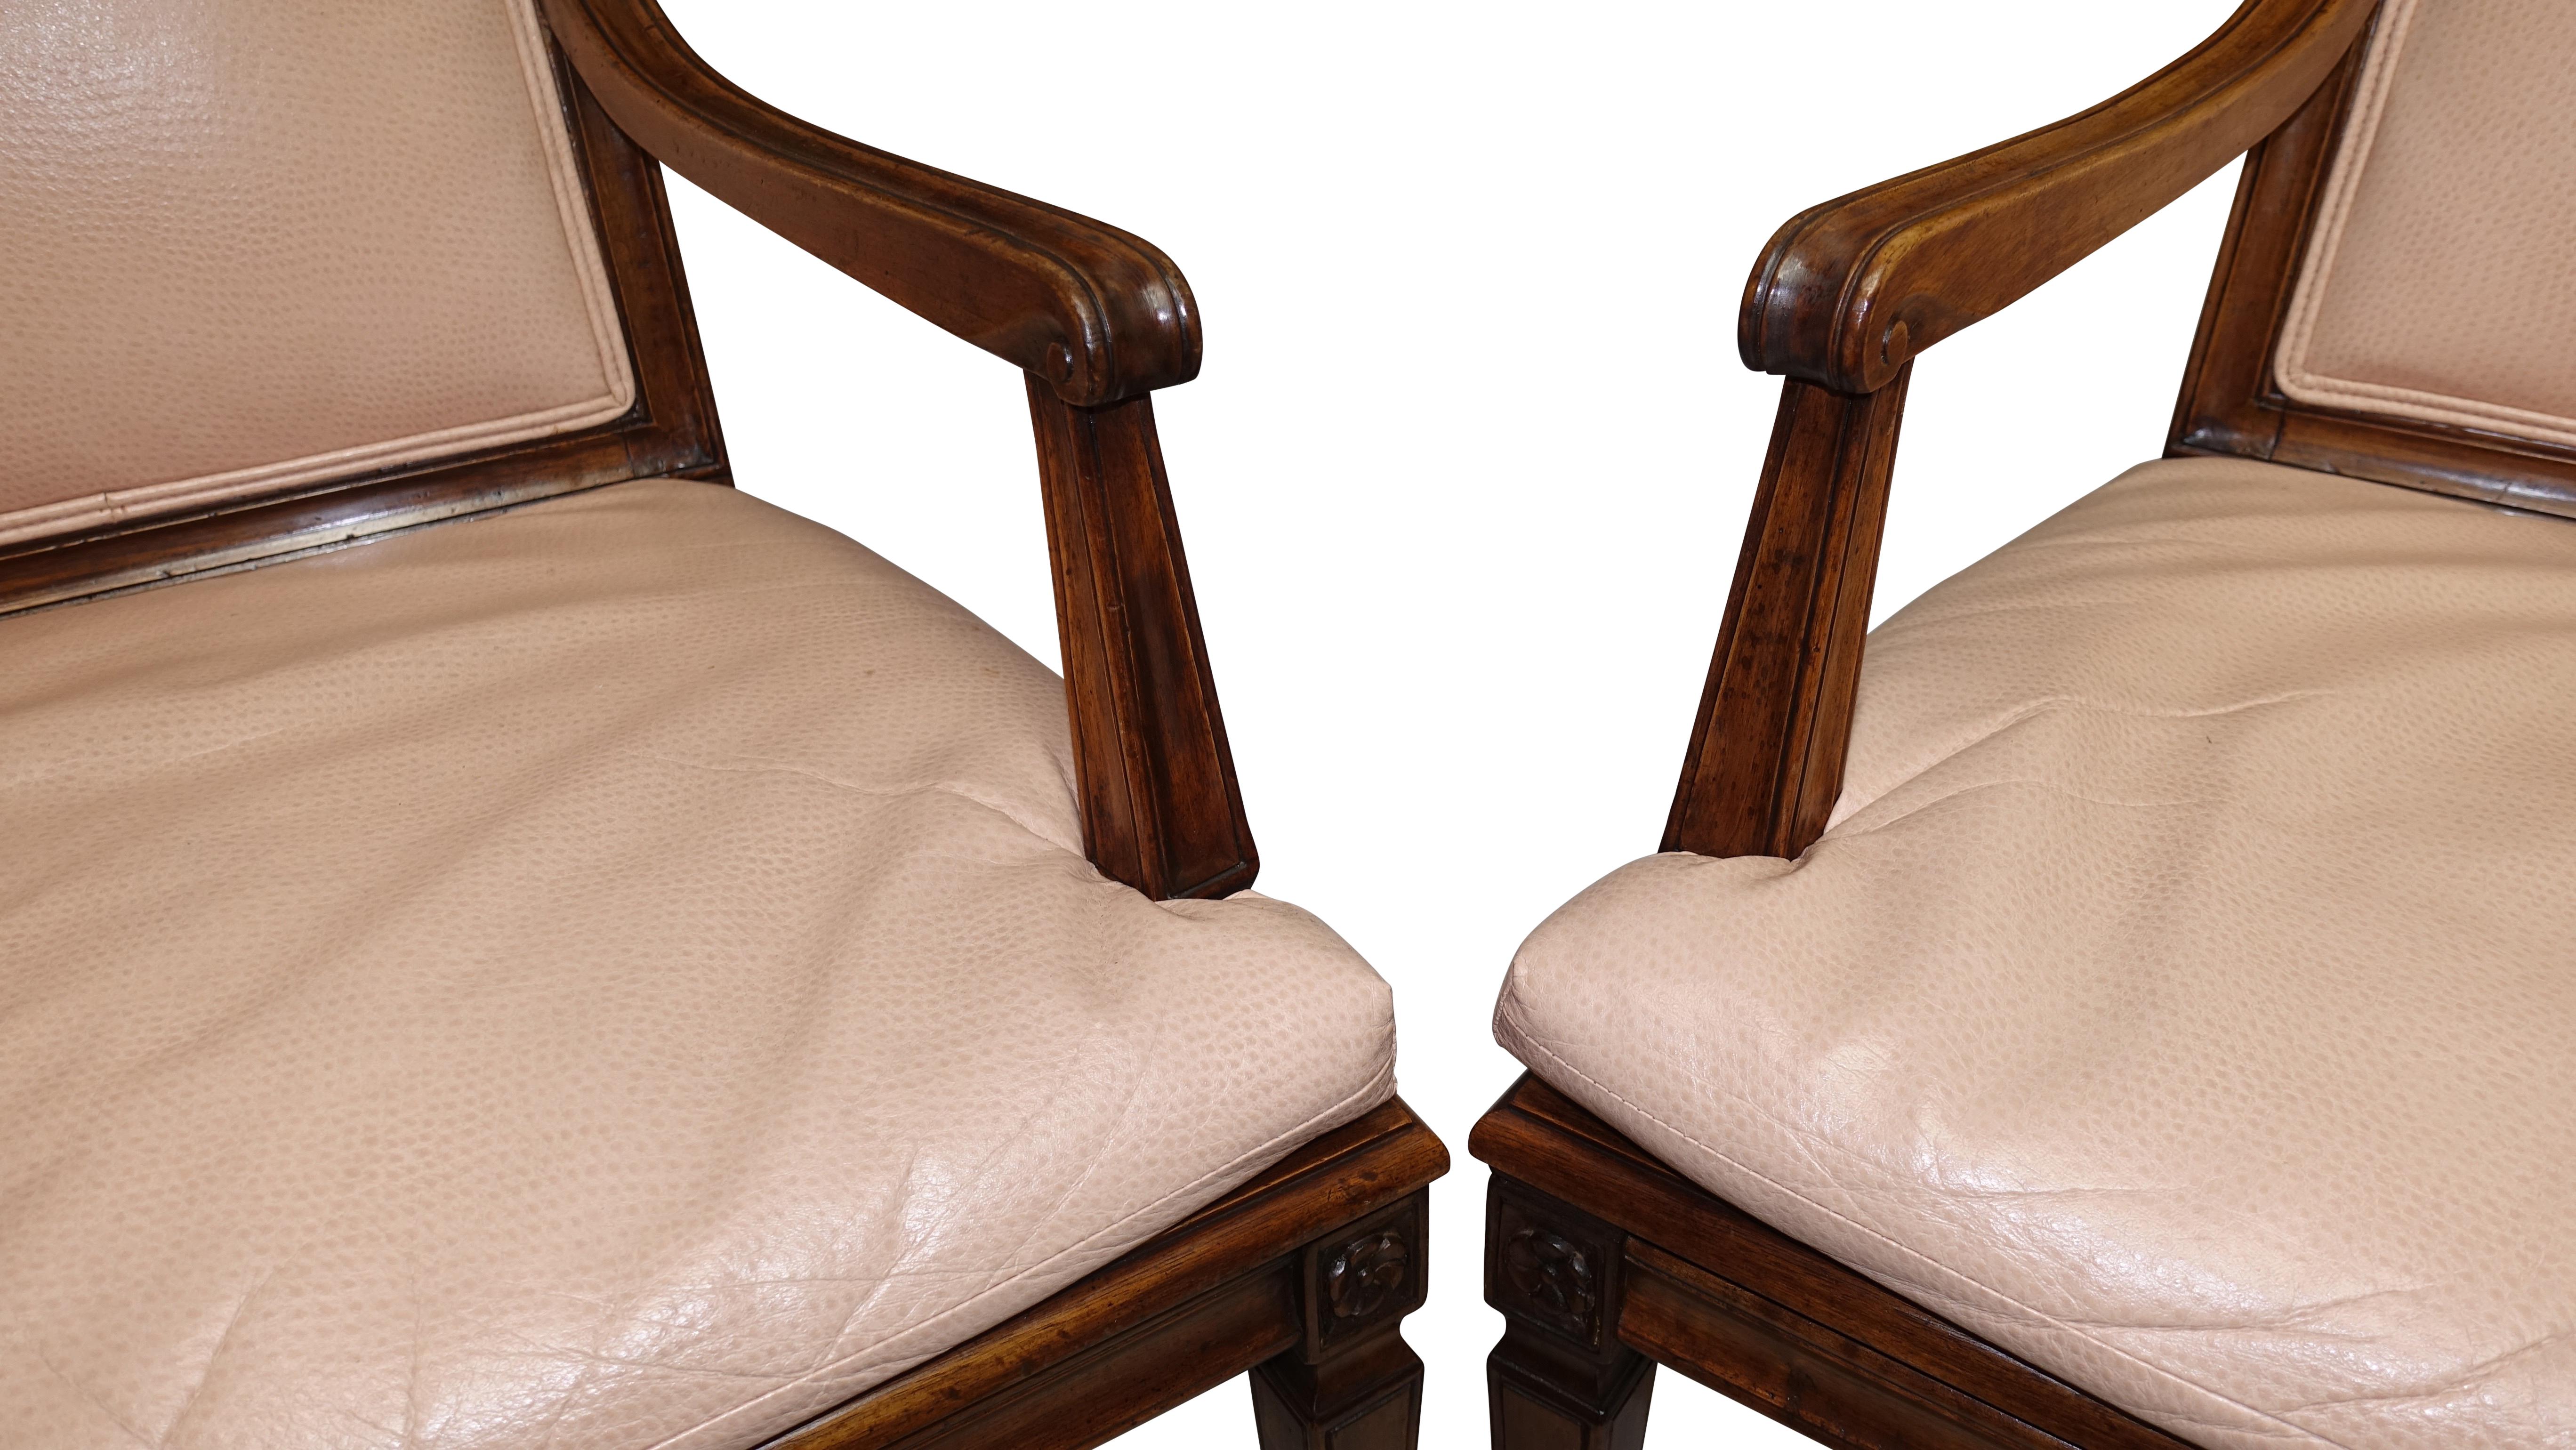 Beech Set of Four Neoclassical Style Armchairs, Italian, Late 19th-Early 20th Century